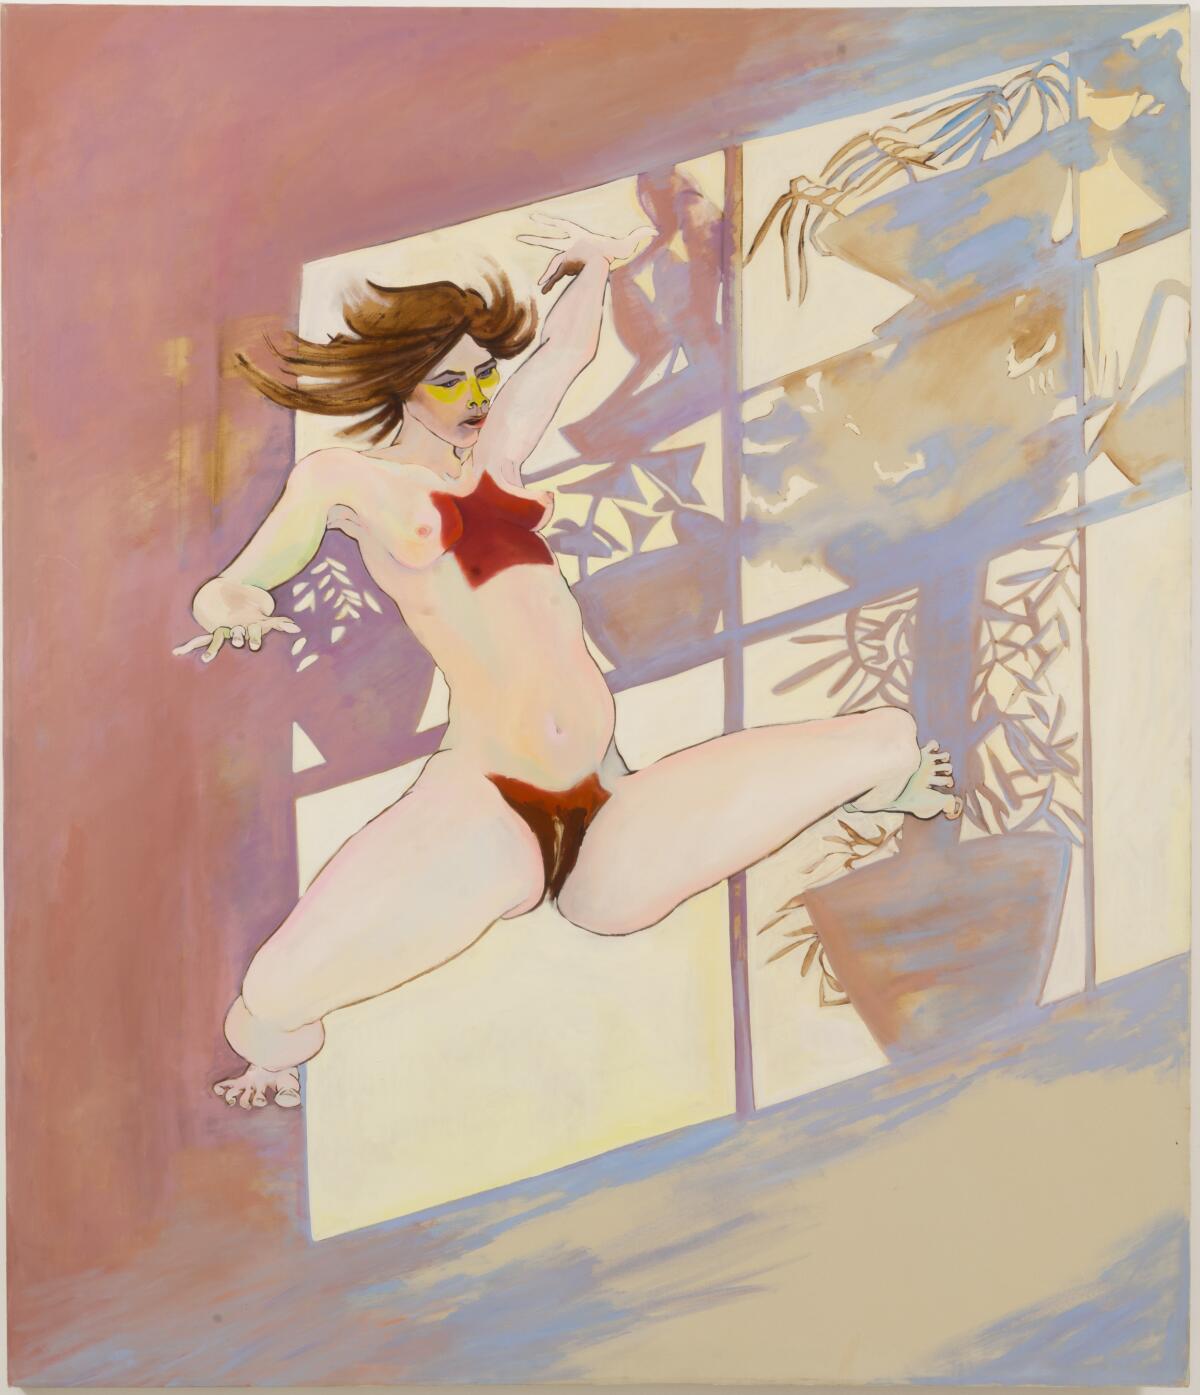 A painting of a nude woman midleap.